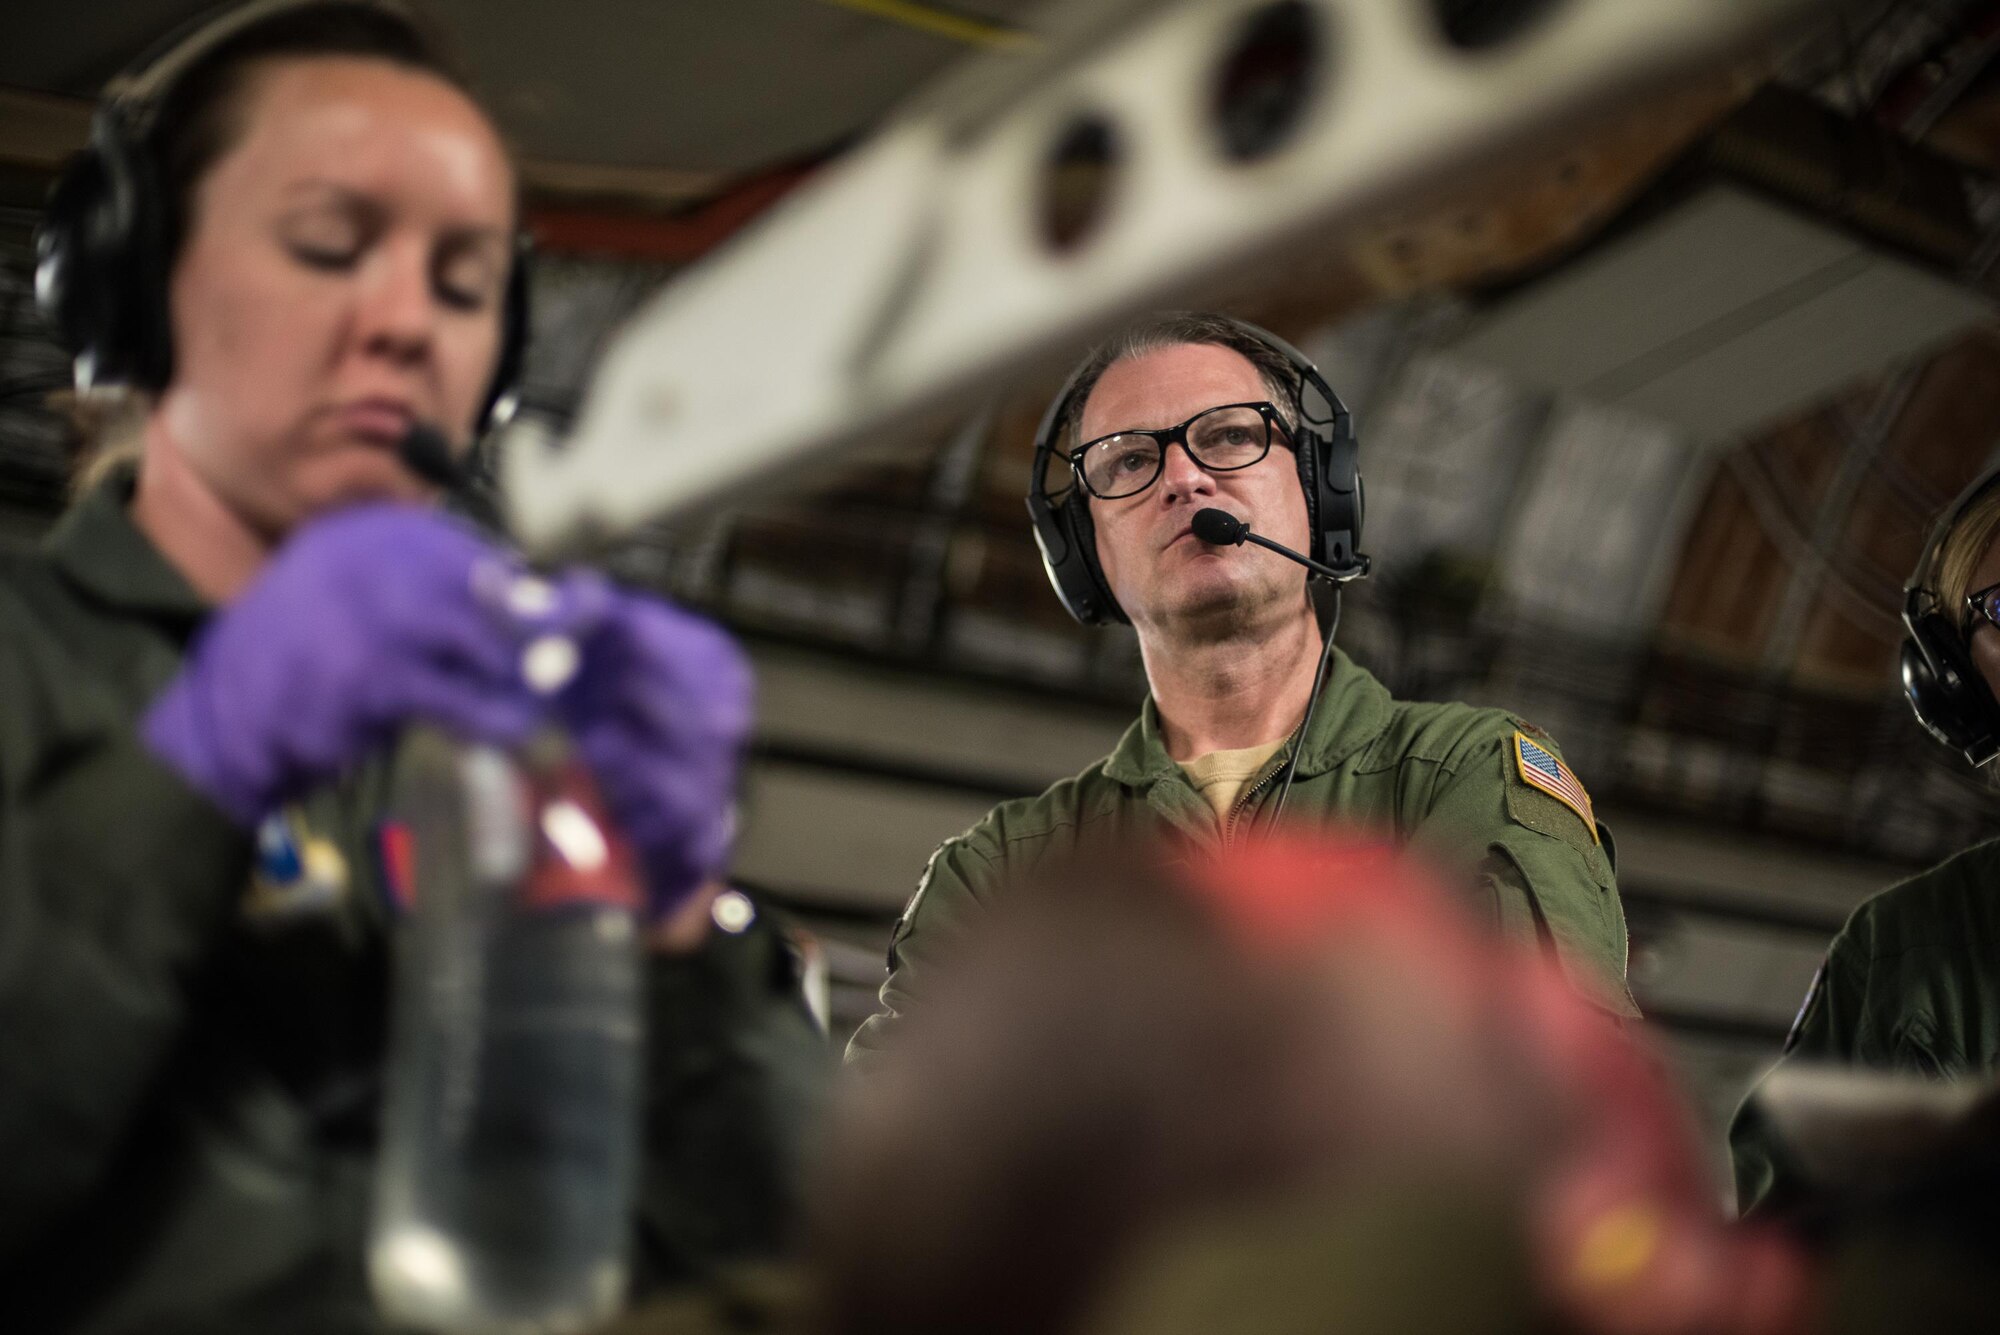 Maj. Casey Patton, medical crew coordinator for the flight and senior health technician at the 137th Aeromedical Evacuation Squadron, Will Rogers Air National Guard Base, Oklahoma City, listens to a crew member through his headset as another aeromedical technician hangs an IV fluid bag while transporting simulated burn patients aboard a C-17 Globemaster III from the 105th Airlift Wing, Stewart Air National Guard Base, N.Y., en route to Altus Air Force Base, Altus, Okla., Oct. 30, 2017. The flight was part of a wildfire scenario during Vigilant Guard, a North American Command-sponsored, state-wide emergency response exercise held Oct. 30 to Nov. 2, 2017. (U.S. Air National Guard photo by Staff Sgt. Kasey M. Phipps)